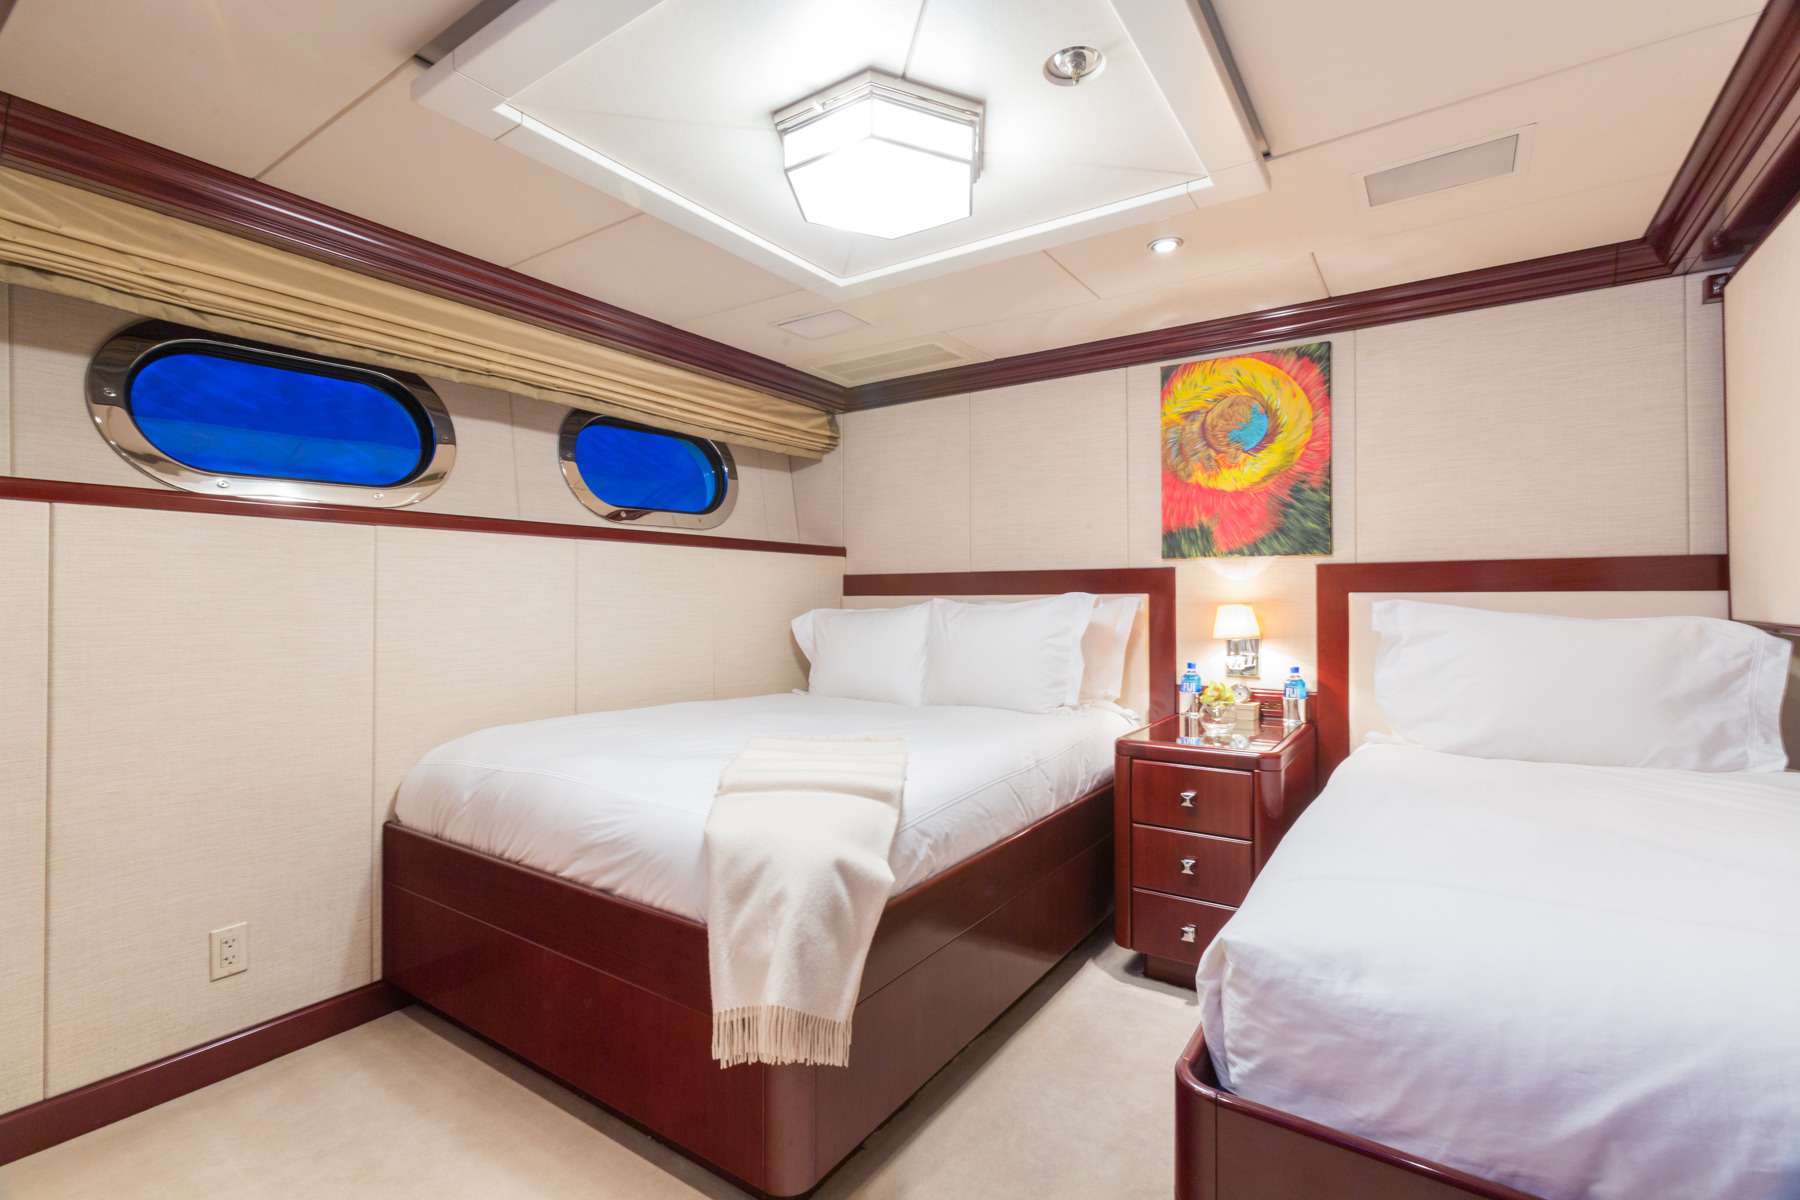 Lady Joy Yacht Charter - Guest Stateroom with 1 Double, 1 Single and a pullman